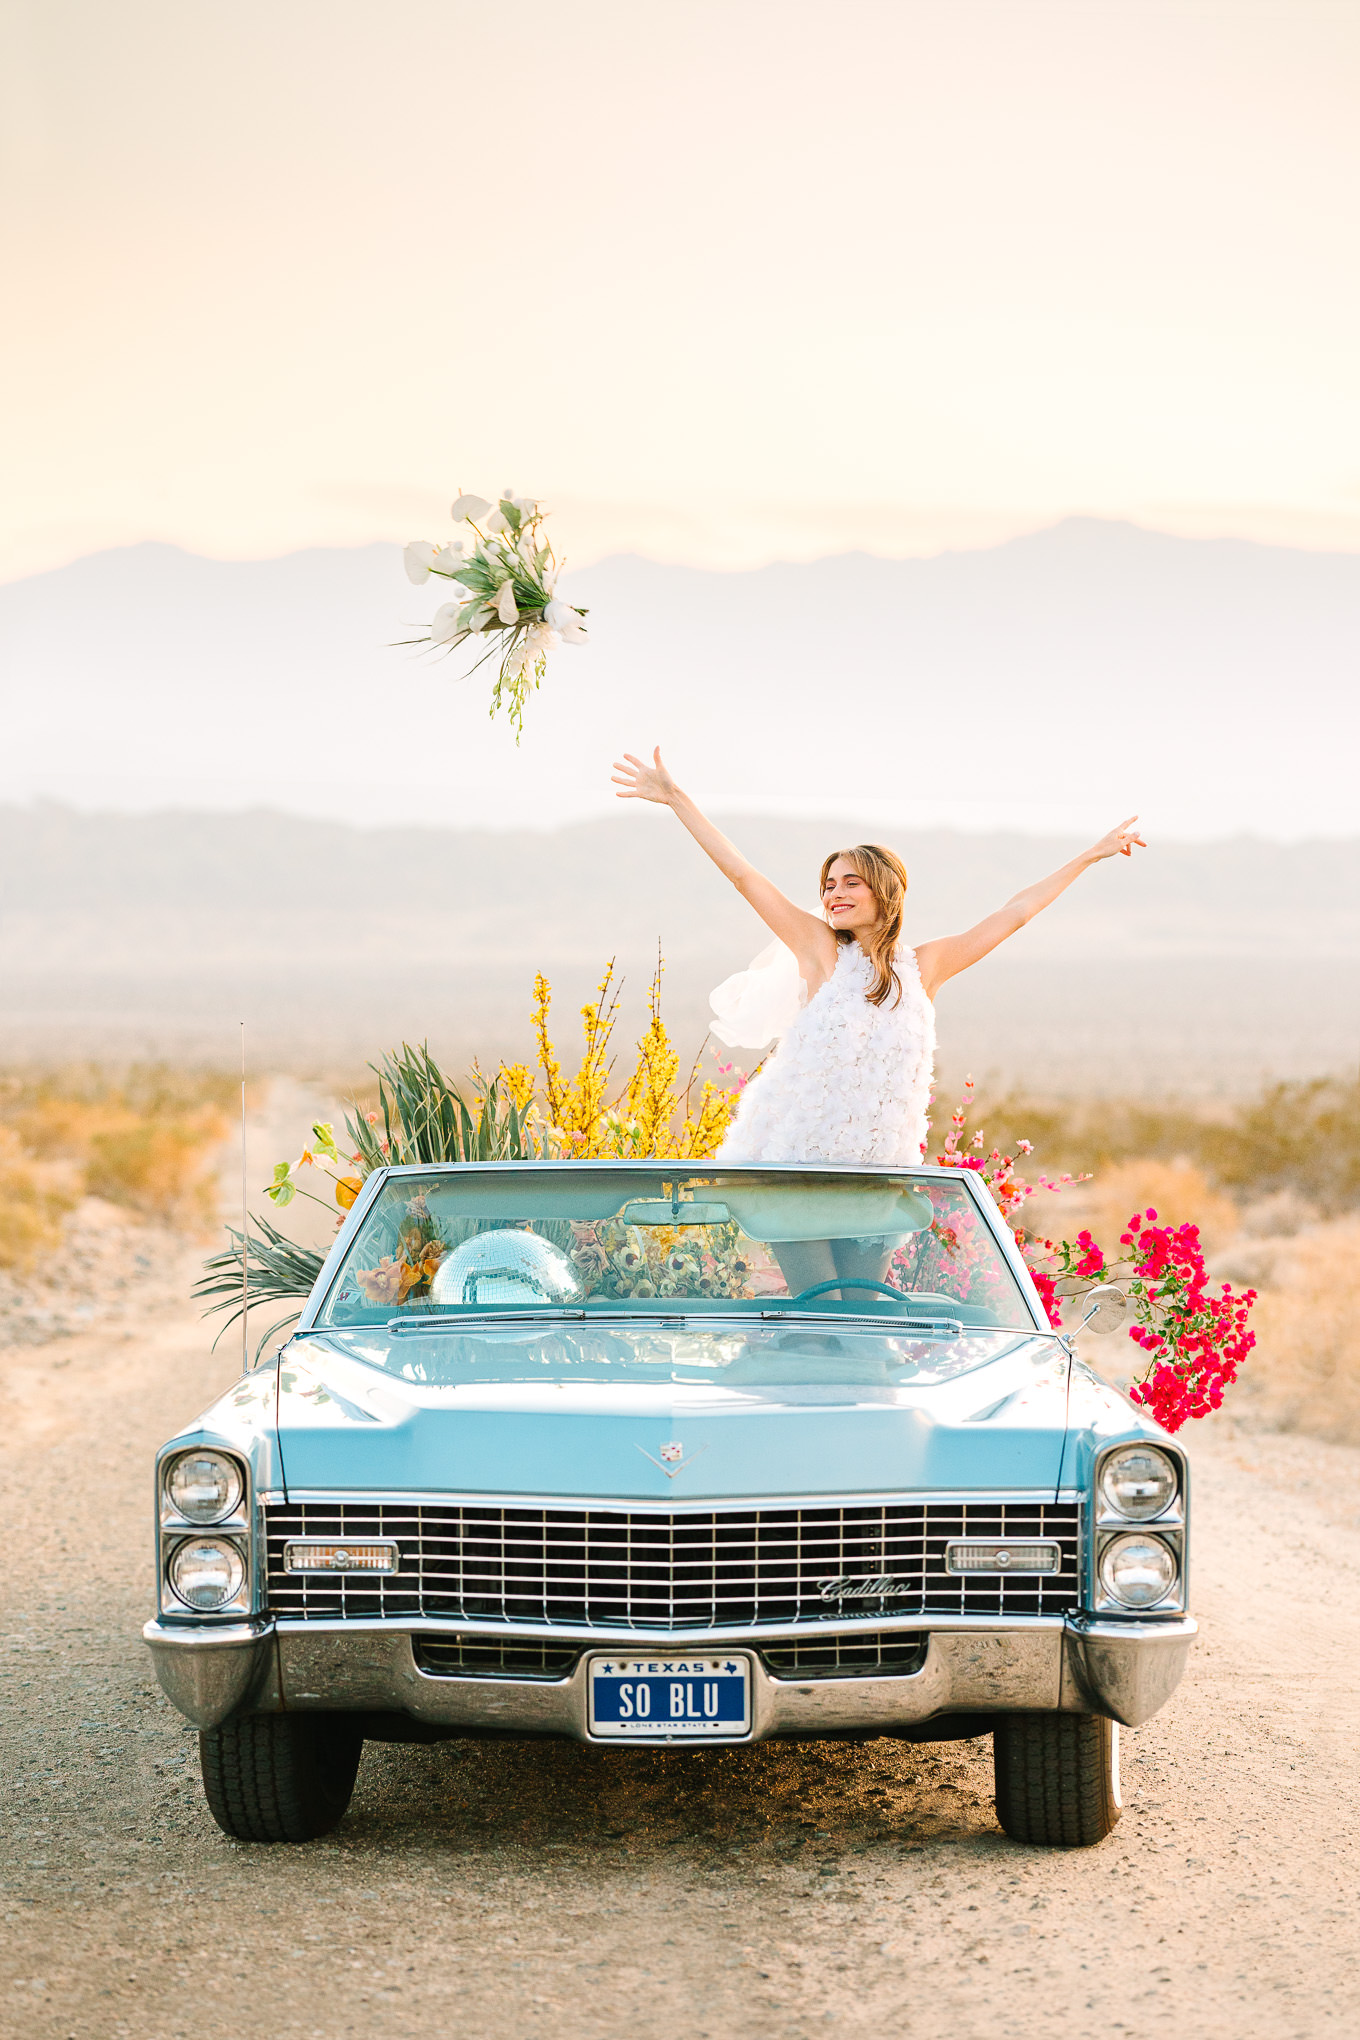 Colorful desert elopement bridal style with short Naeem Khan white dress and a blue classic car filled with flowers | Kindred Presets x Mary Costa Photography Palm Springs Ad Campaign | Colorful Palm Springs wedding photography | #palmspringsphotographer #lightroompresets #sandshotel #pinkhotel   Source: Mary Costa Photography | Los Angeles